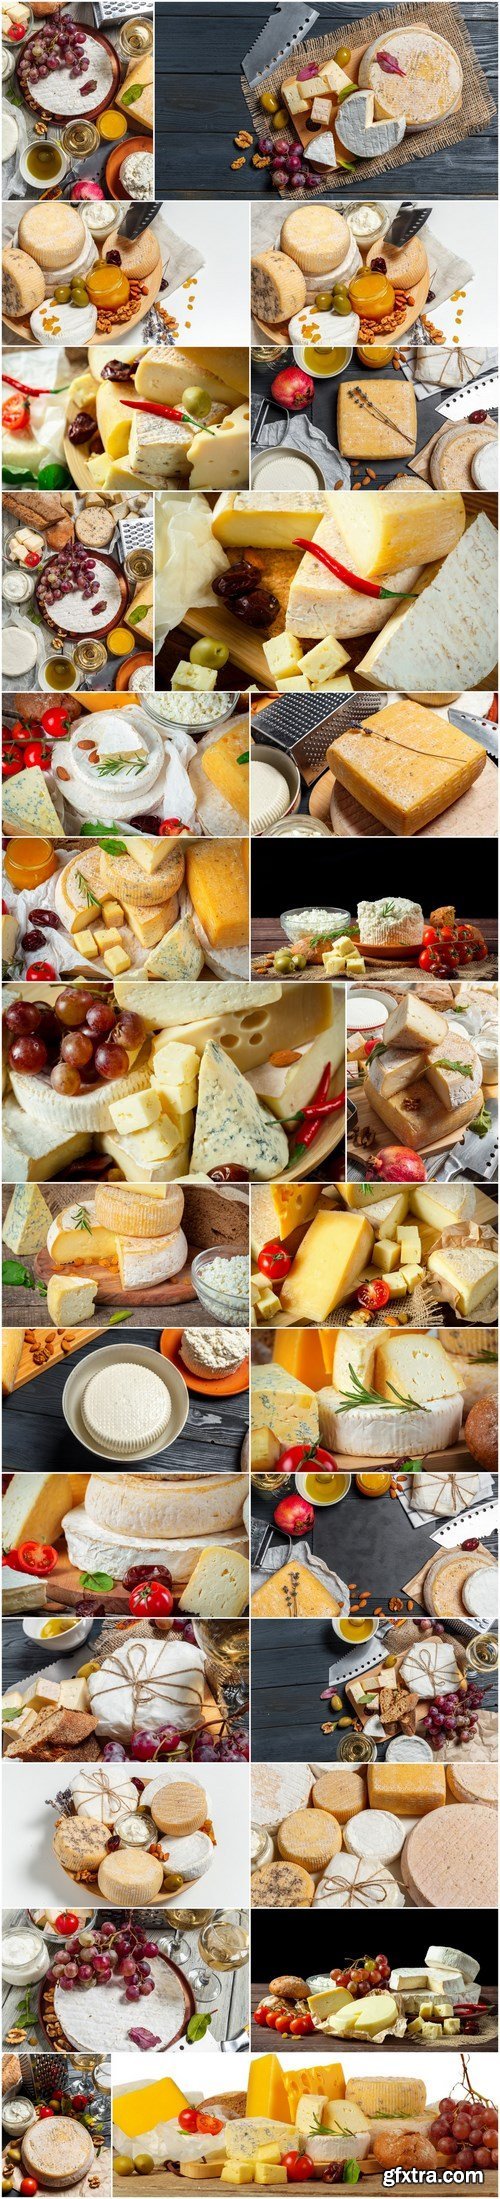 Cheese on wooden table - 28xHQ JPEG